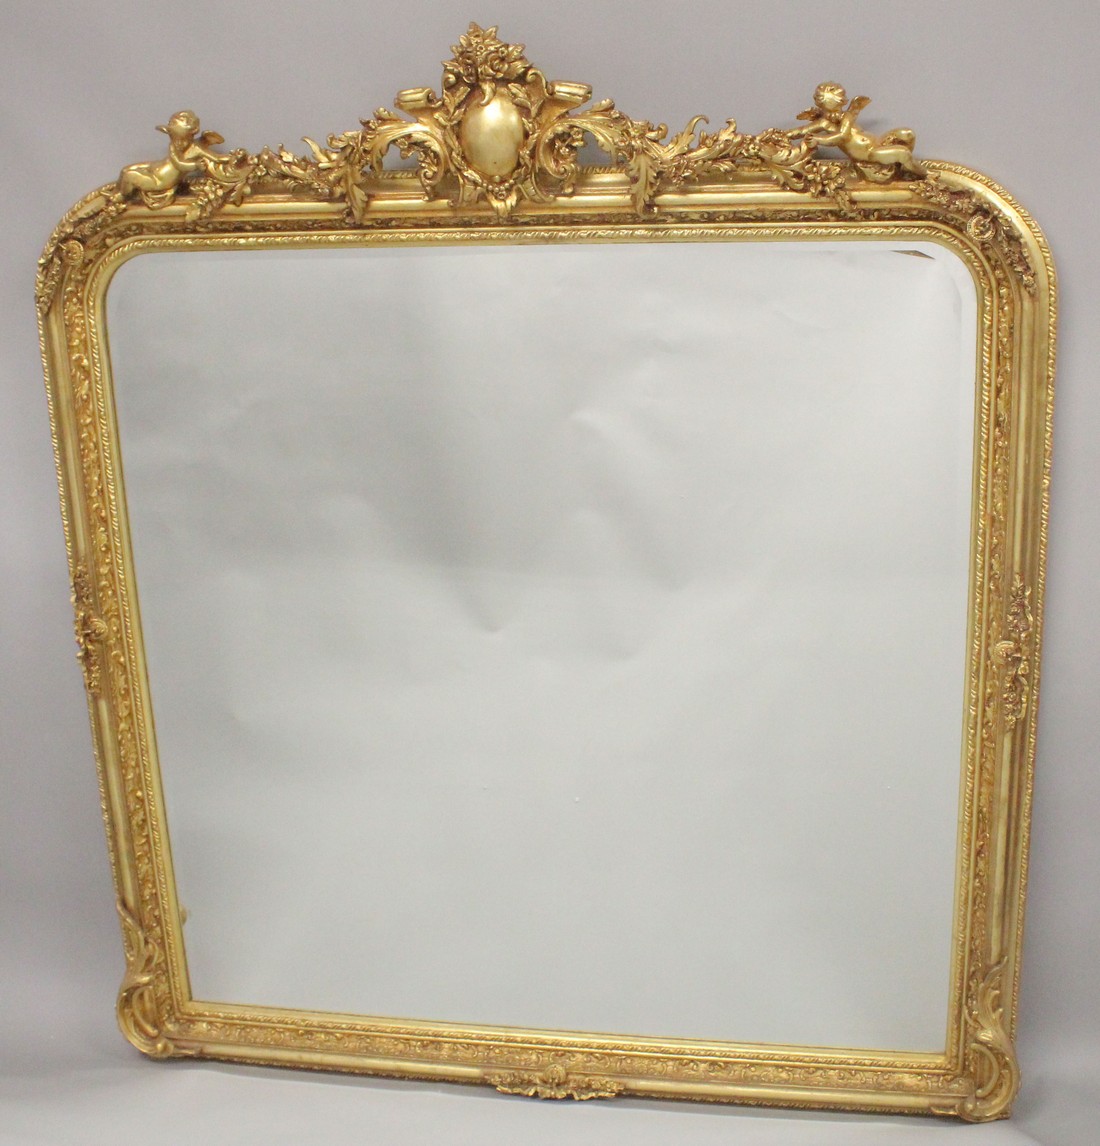 A LARGE GILTWOOD OVER MANTLE MIRROR with scrolls and cupids. 5ft 6ins high, 4ft 8ins wide.